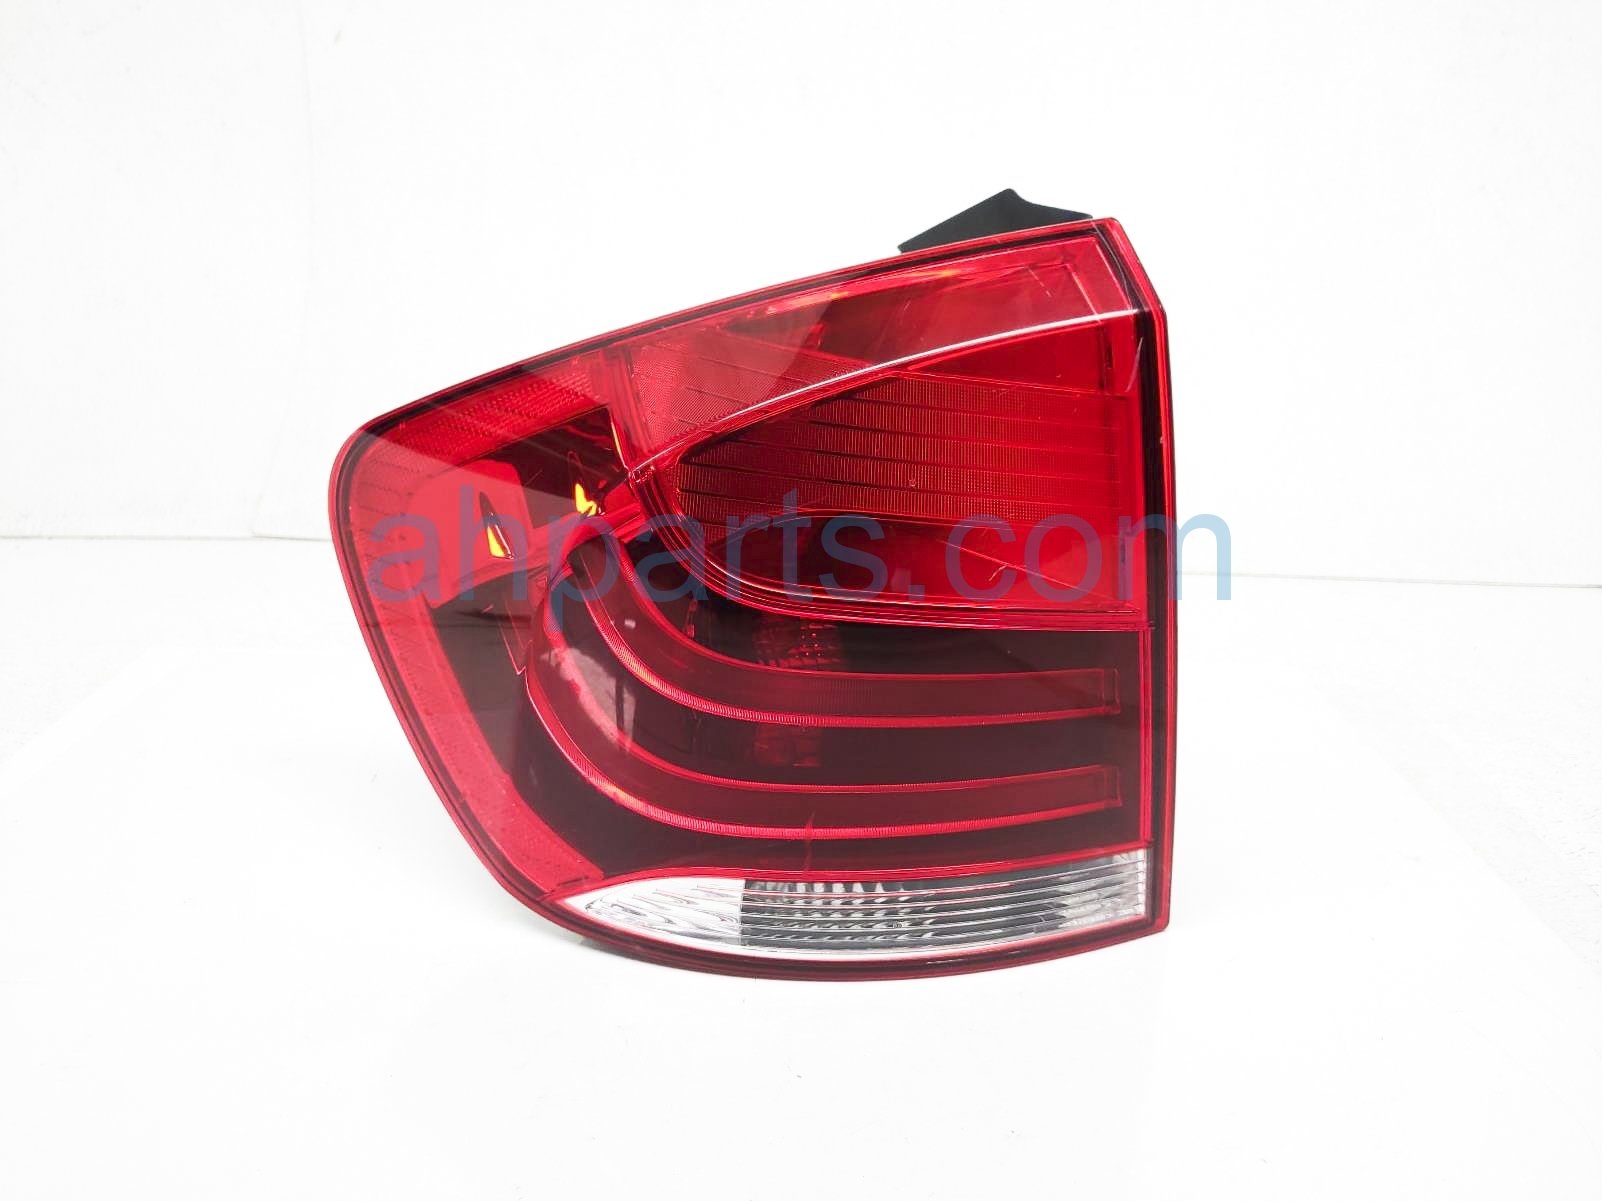 $88 BMW LH TAIL LAMP / LIGHT (ON BODY)-NOTES